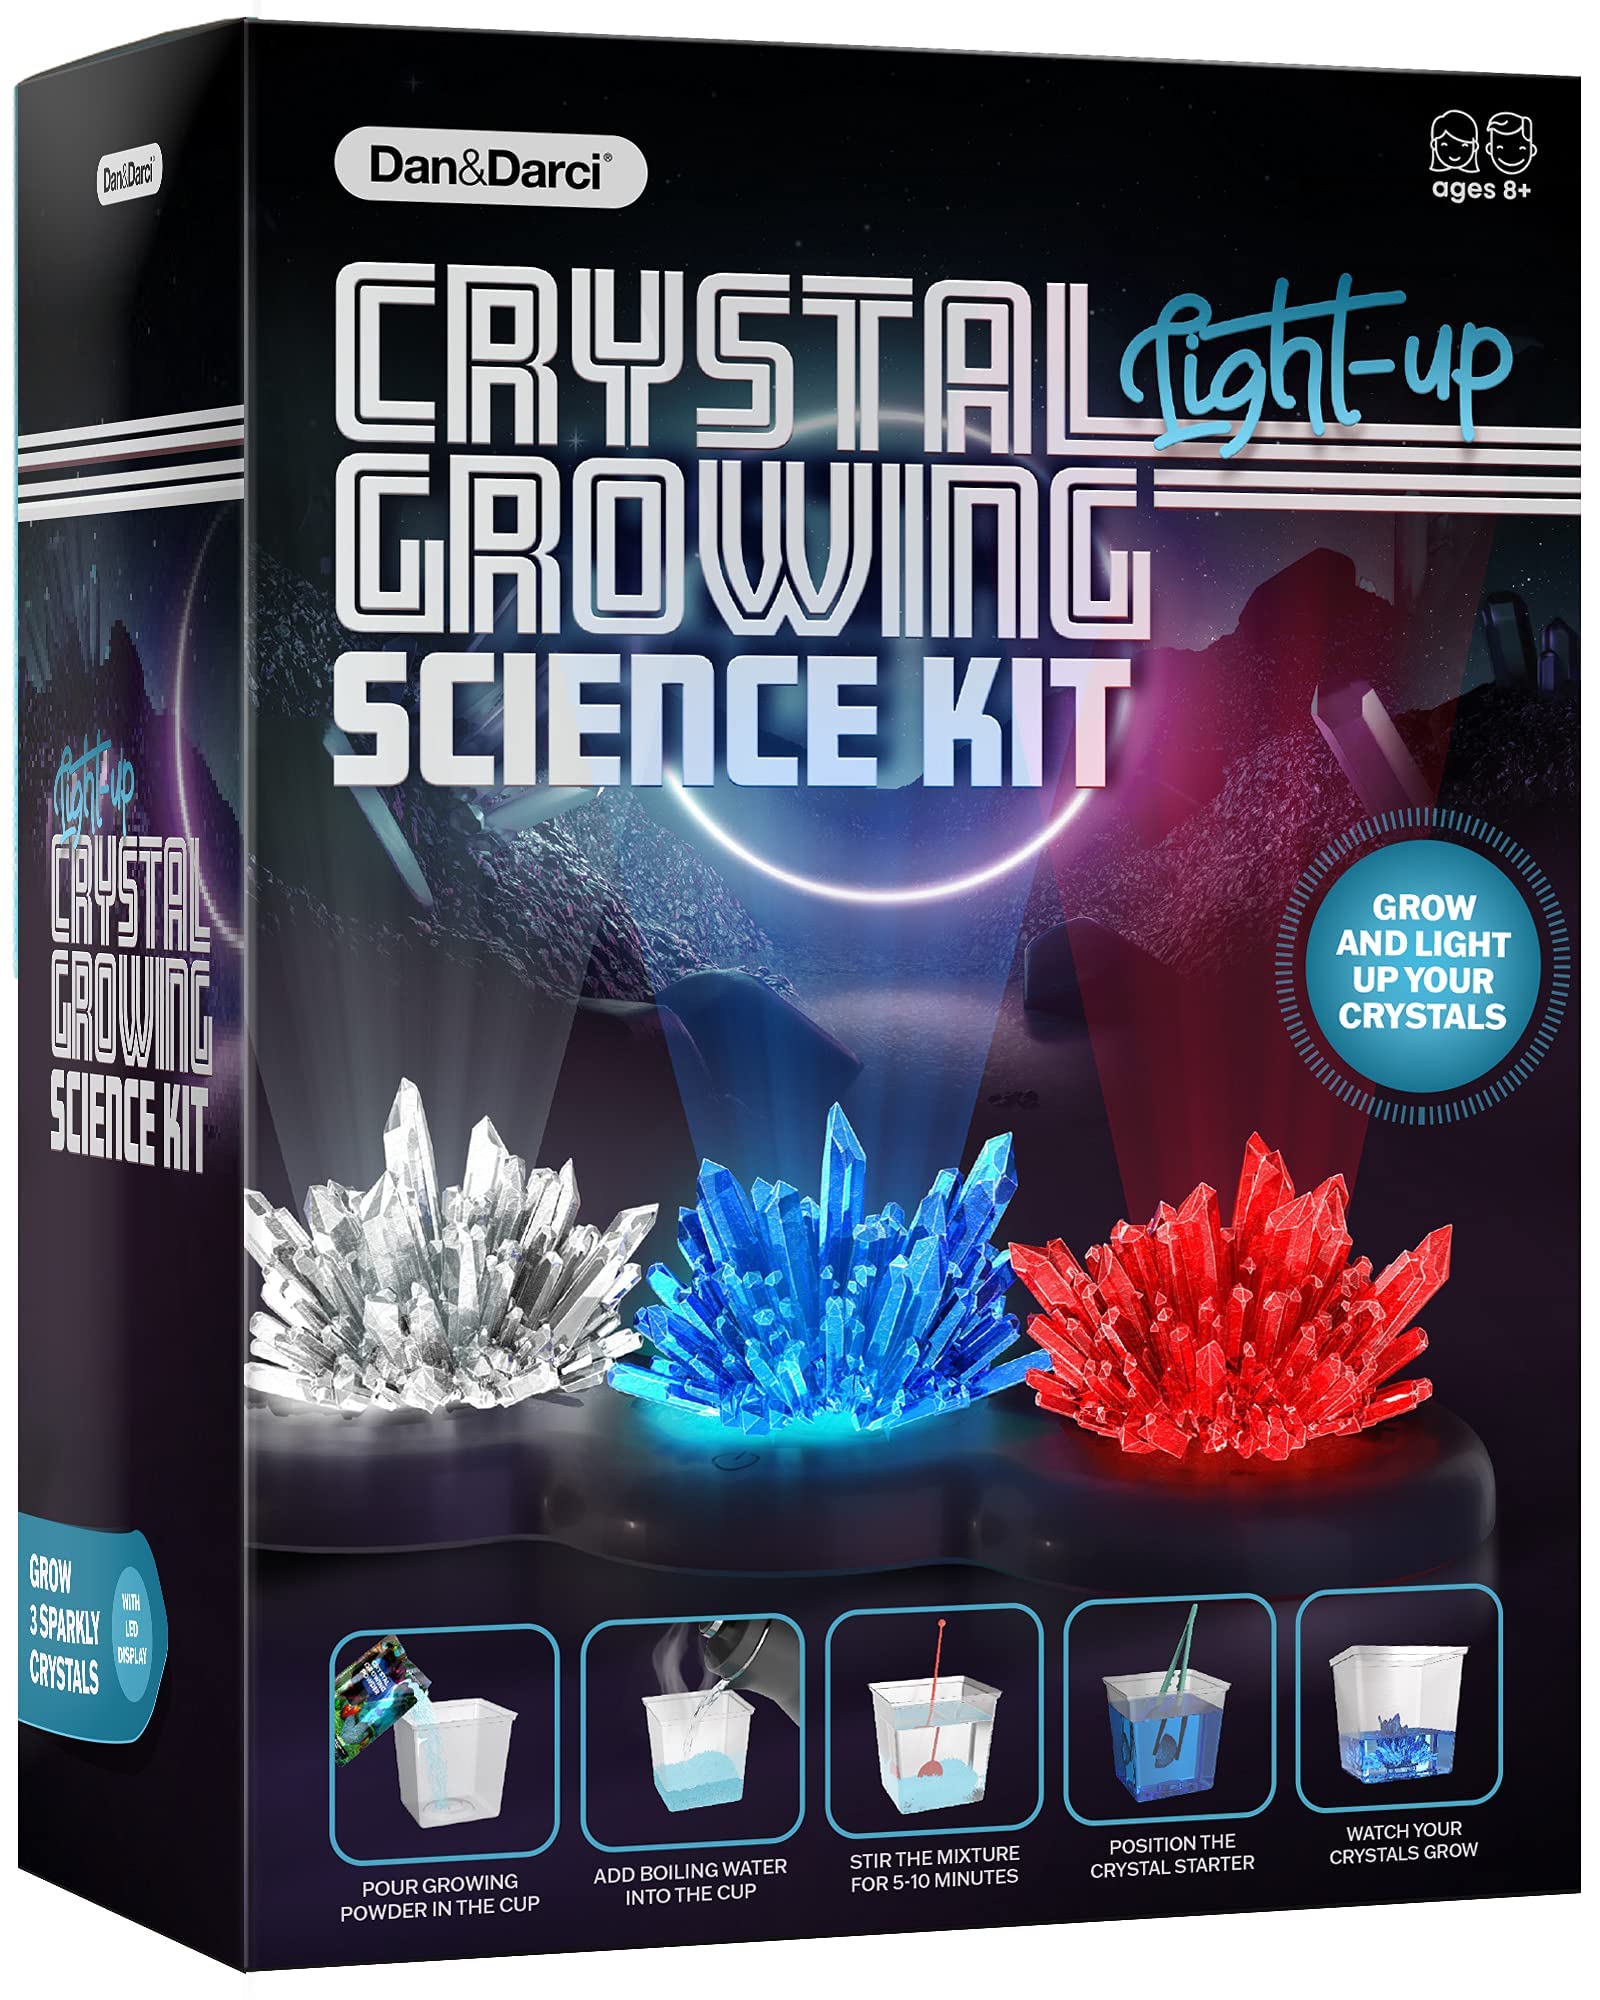 Crystal Growing Kit for Kids - Science Experiments for Boys and Girls Ages 6-12 Year Old Girl Gifts - Boy Craft Toys STEM Crafts Activities, DIY Projects Kits - Gift for Kids age 6 7 8 9 10 11 & 12